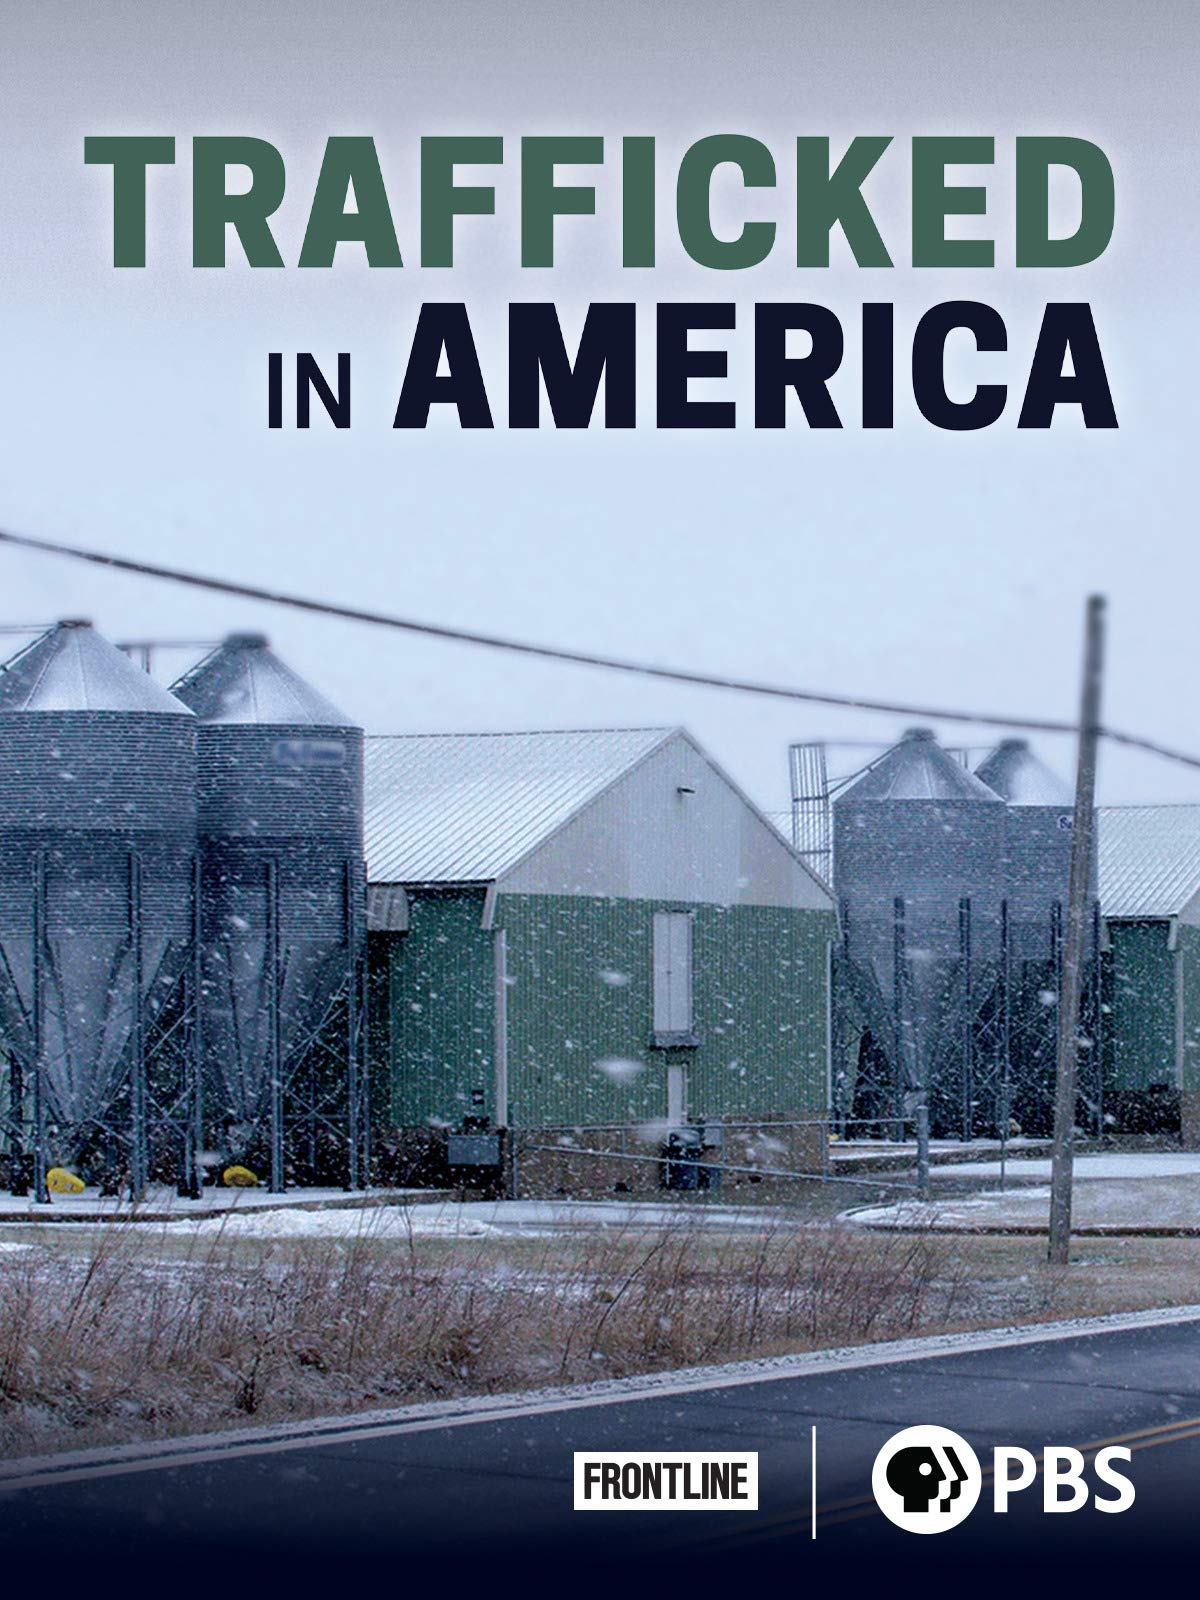 dvd cover for Trafficked in America showing a gray rural town street 